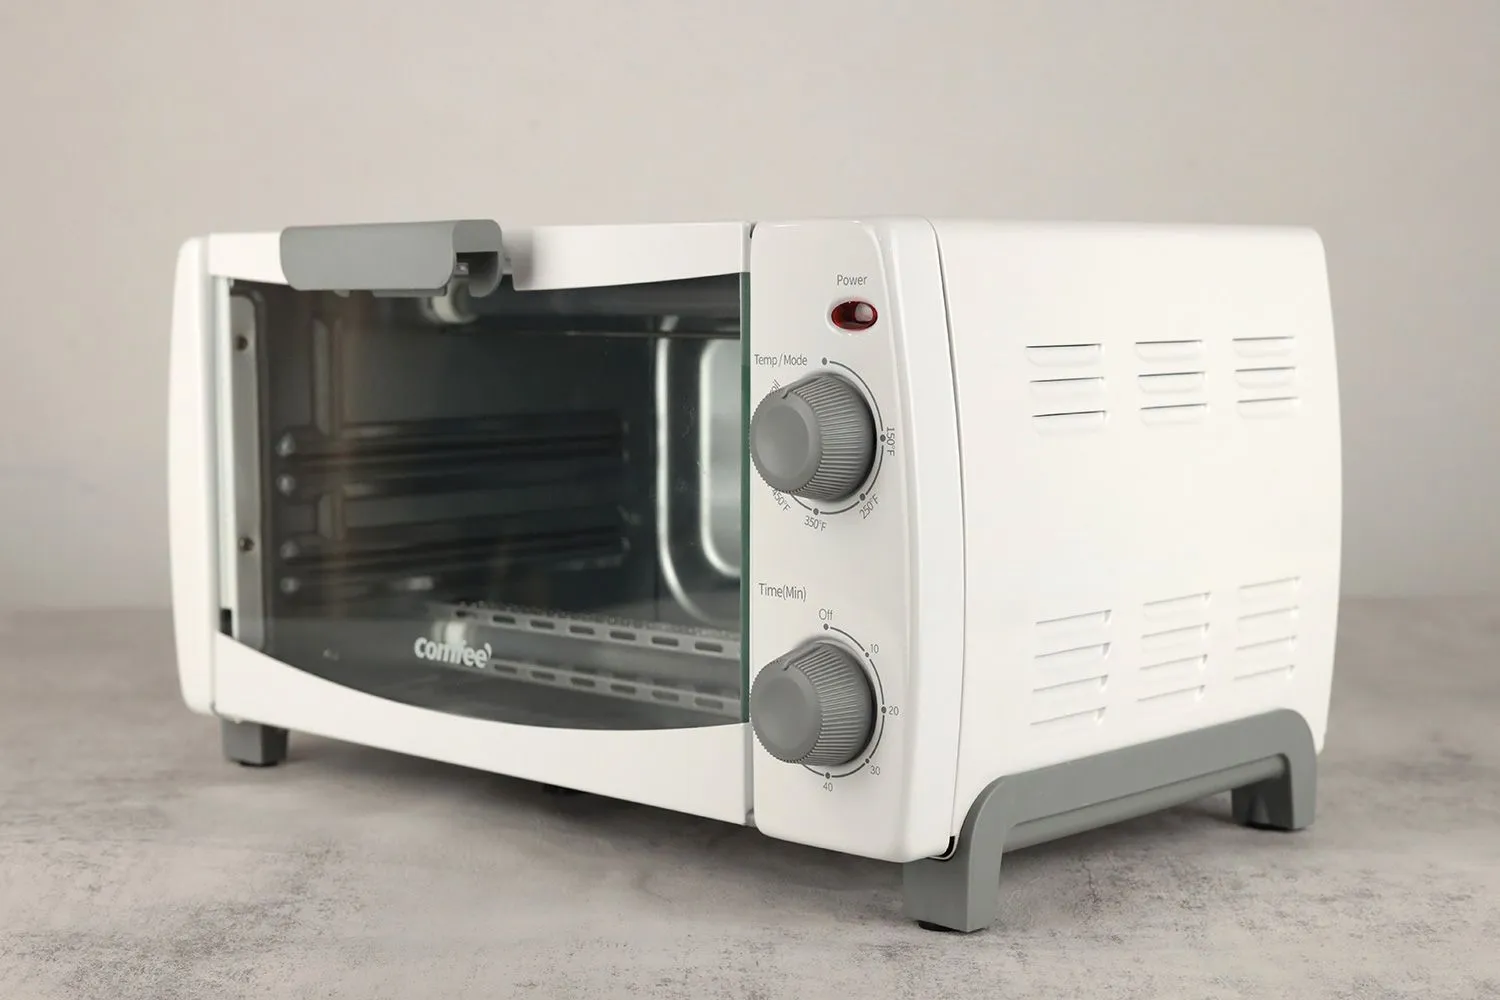 COMFEE Toaster Oven (CFO-BB101) In-depth Review - Healthy Kitchen 101